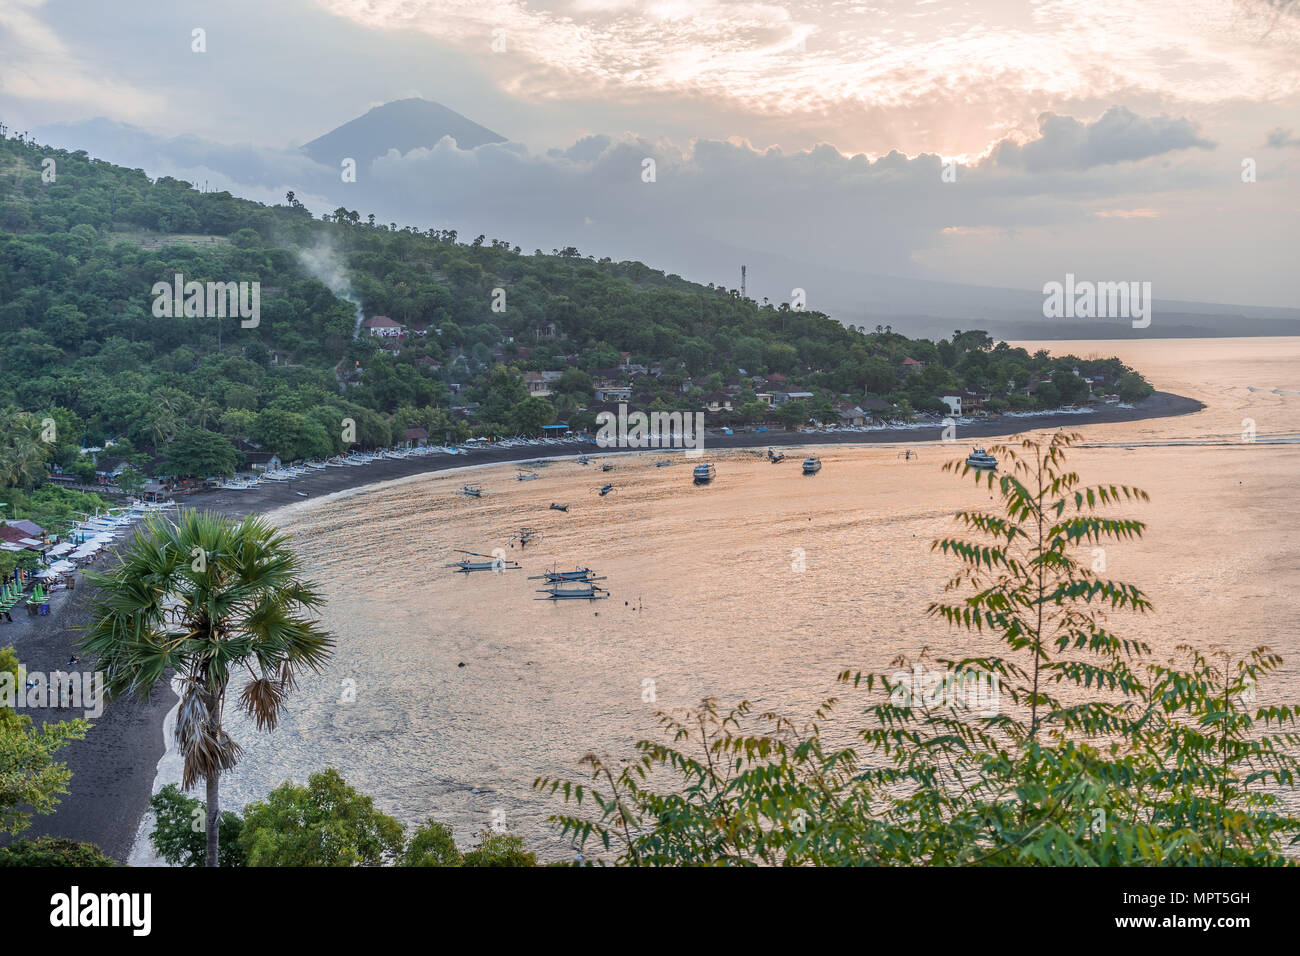 View form 'Sunset Point' in Jemeluk, Amed, Bali, Indonesia. (Picture taken: 17.05.2018) Stock Photo